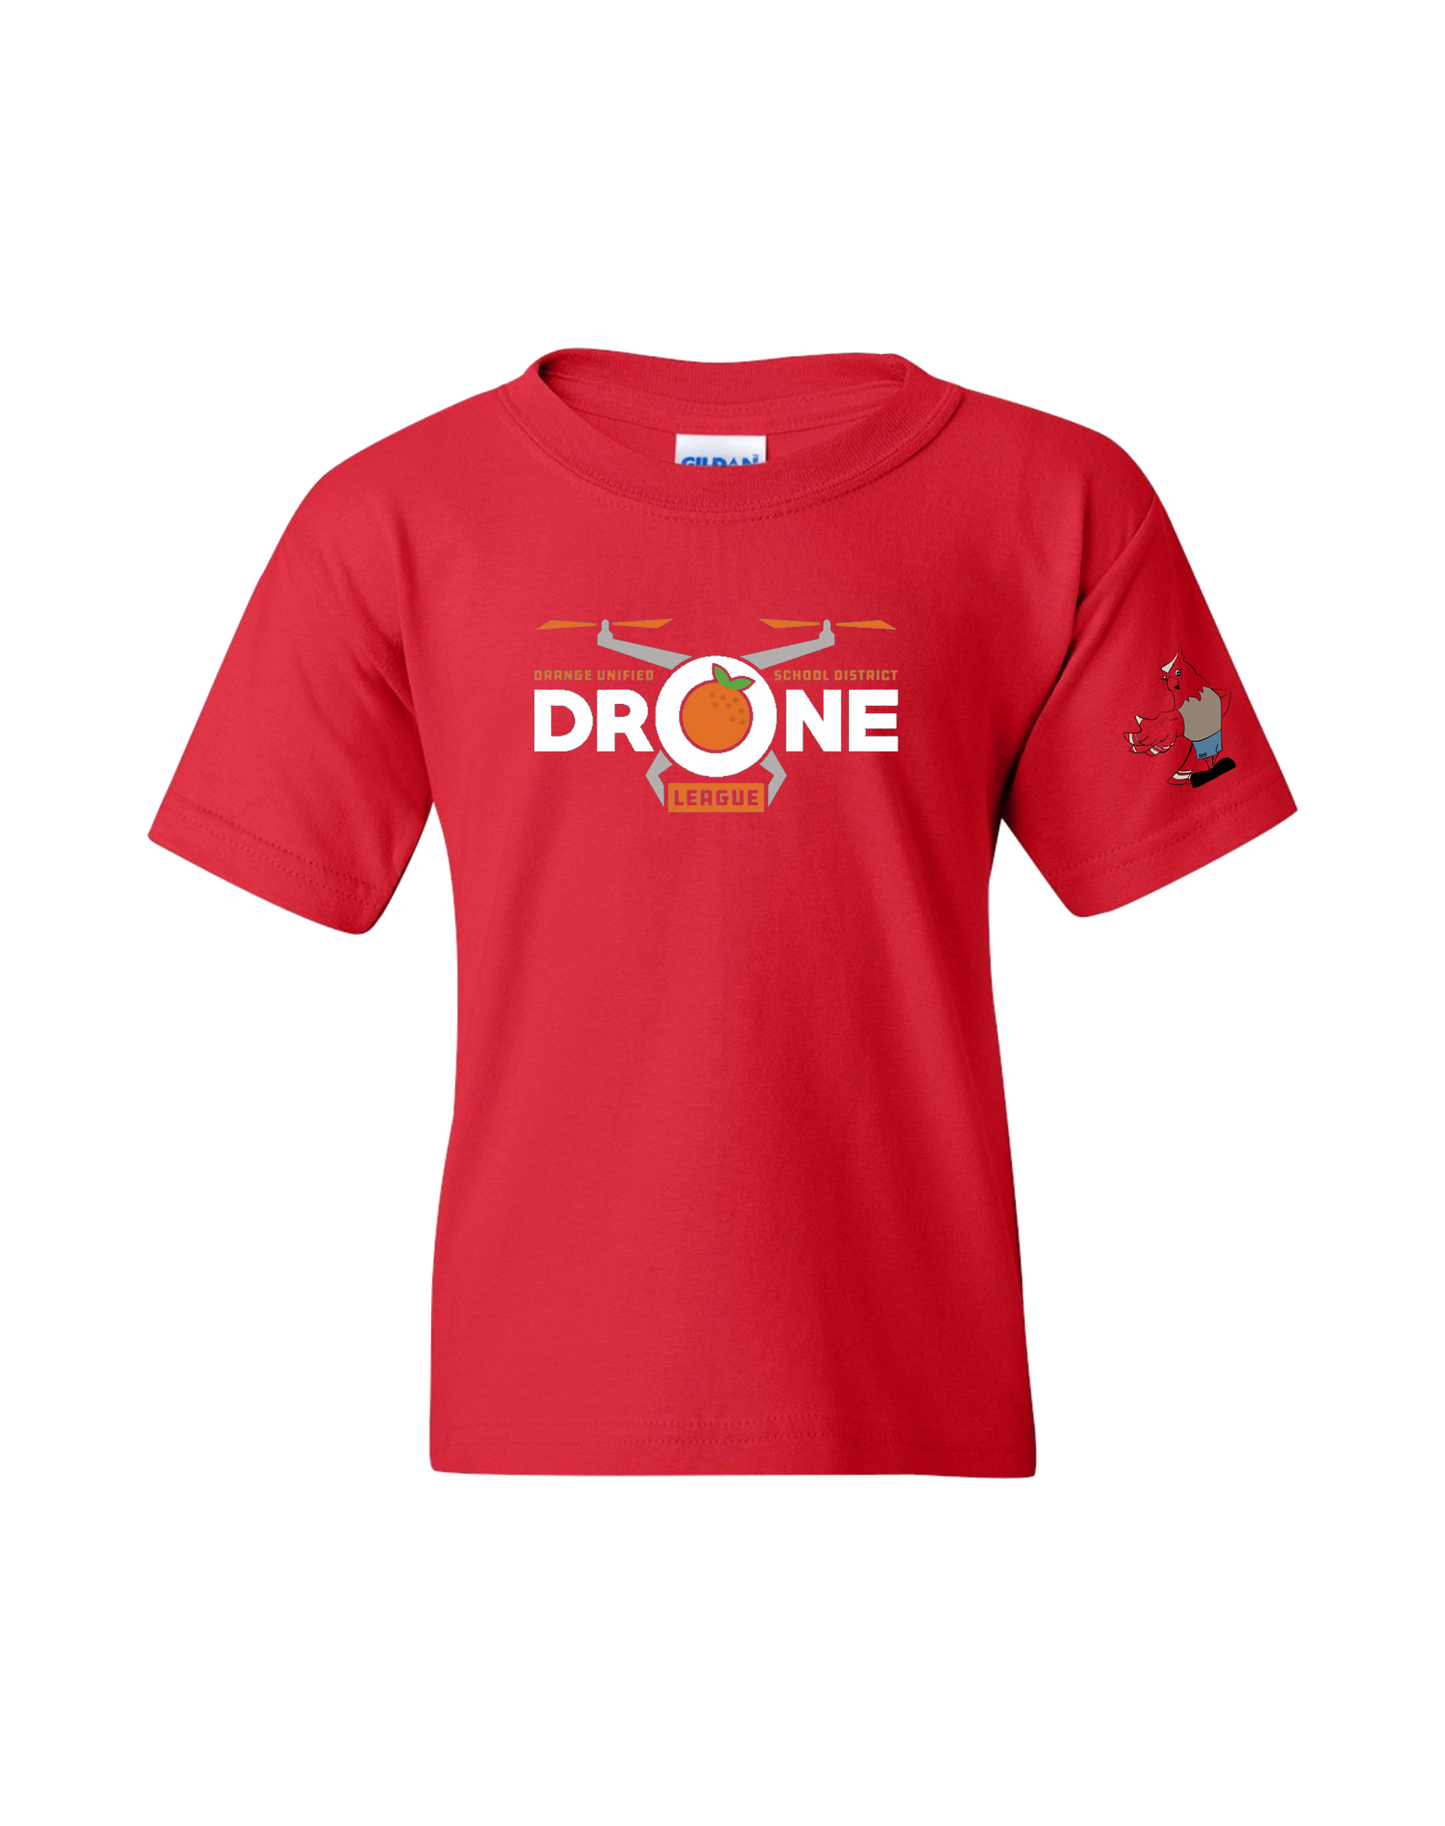 Running Springs - Drone league Youth T-shirt (Red)